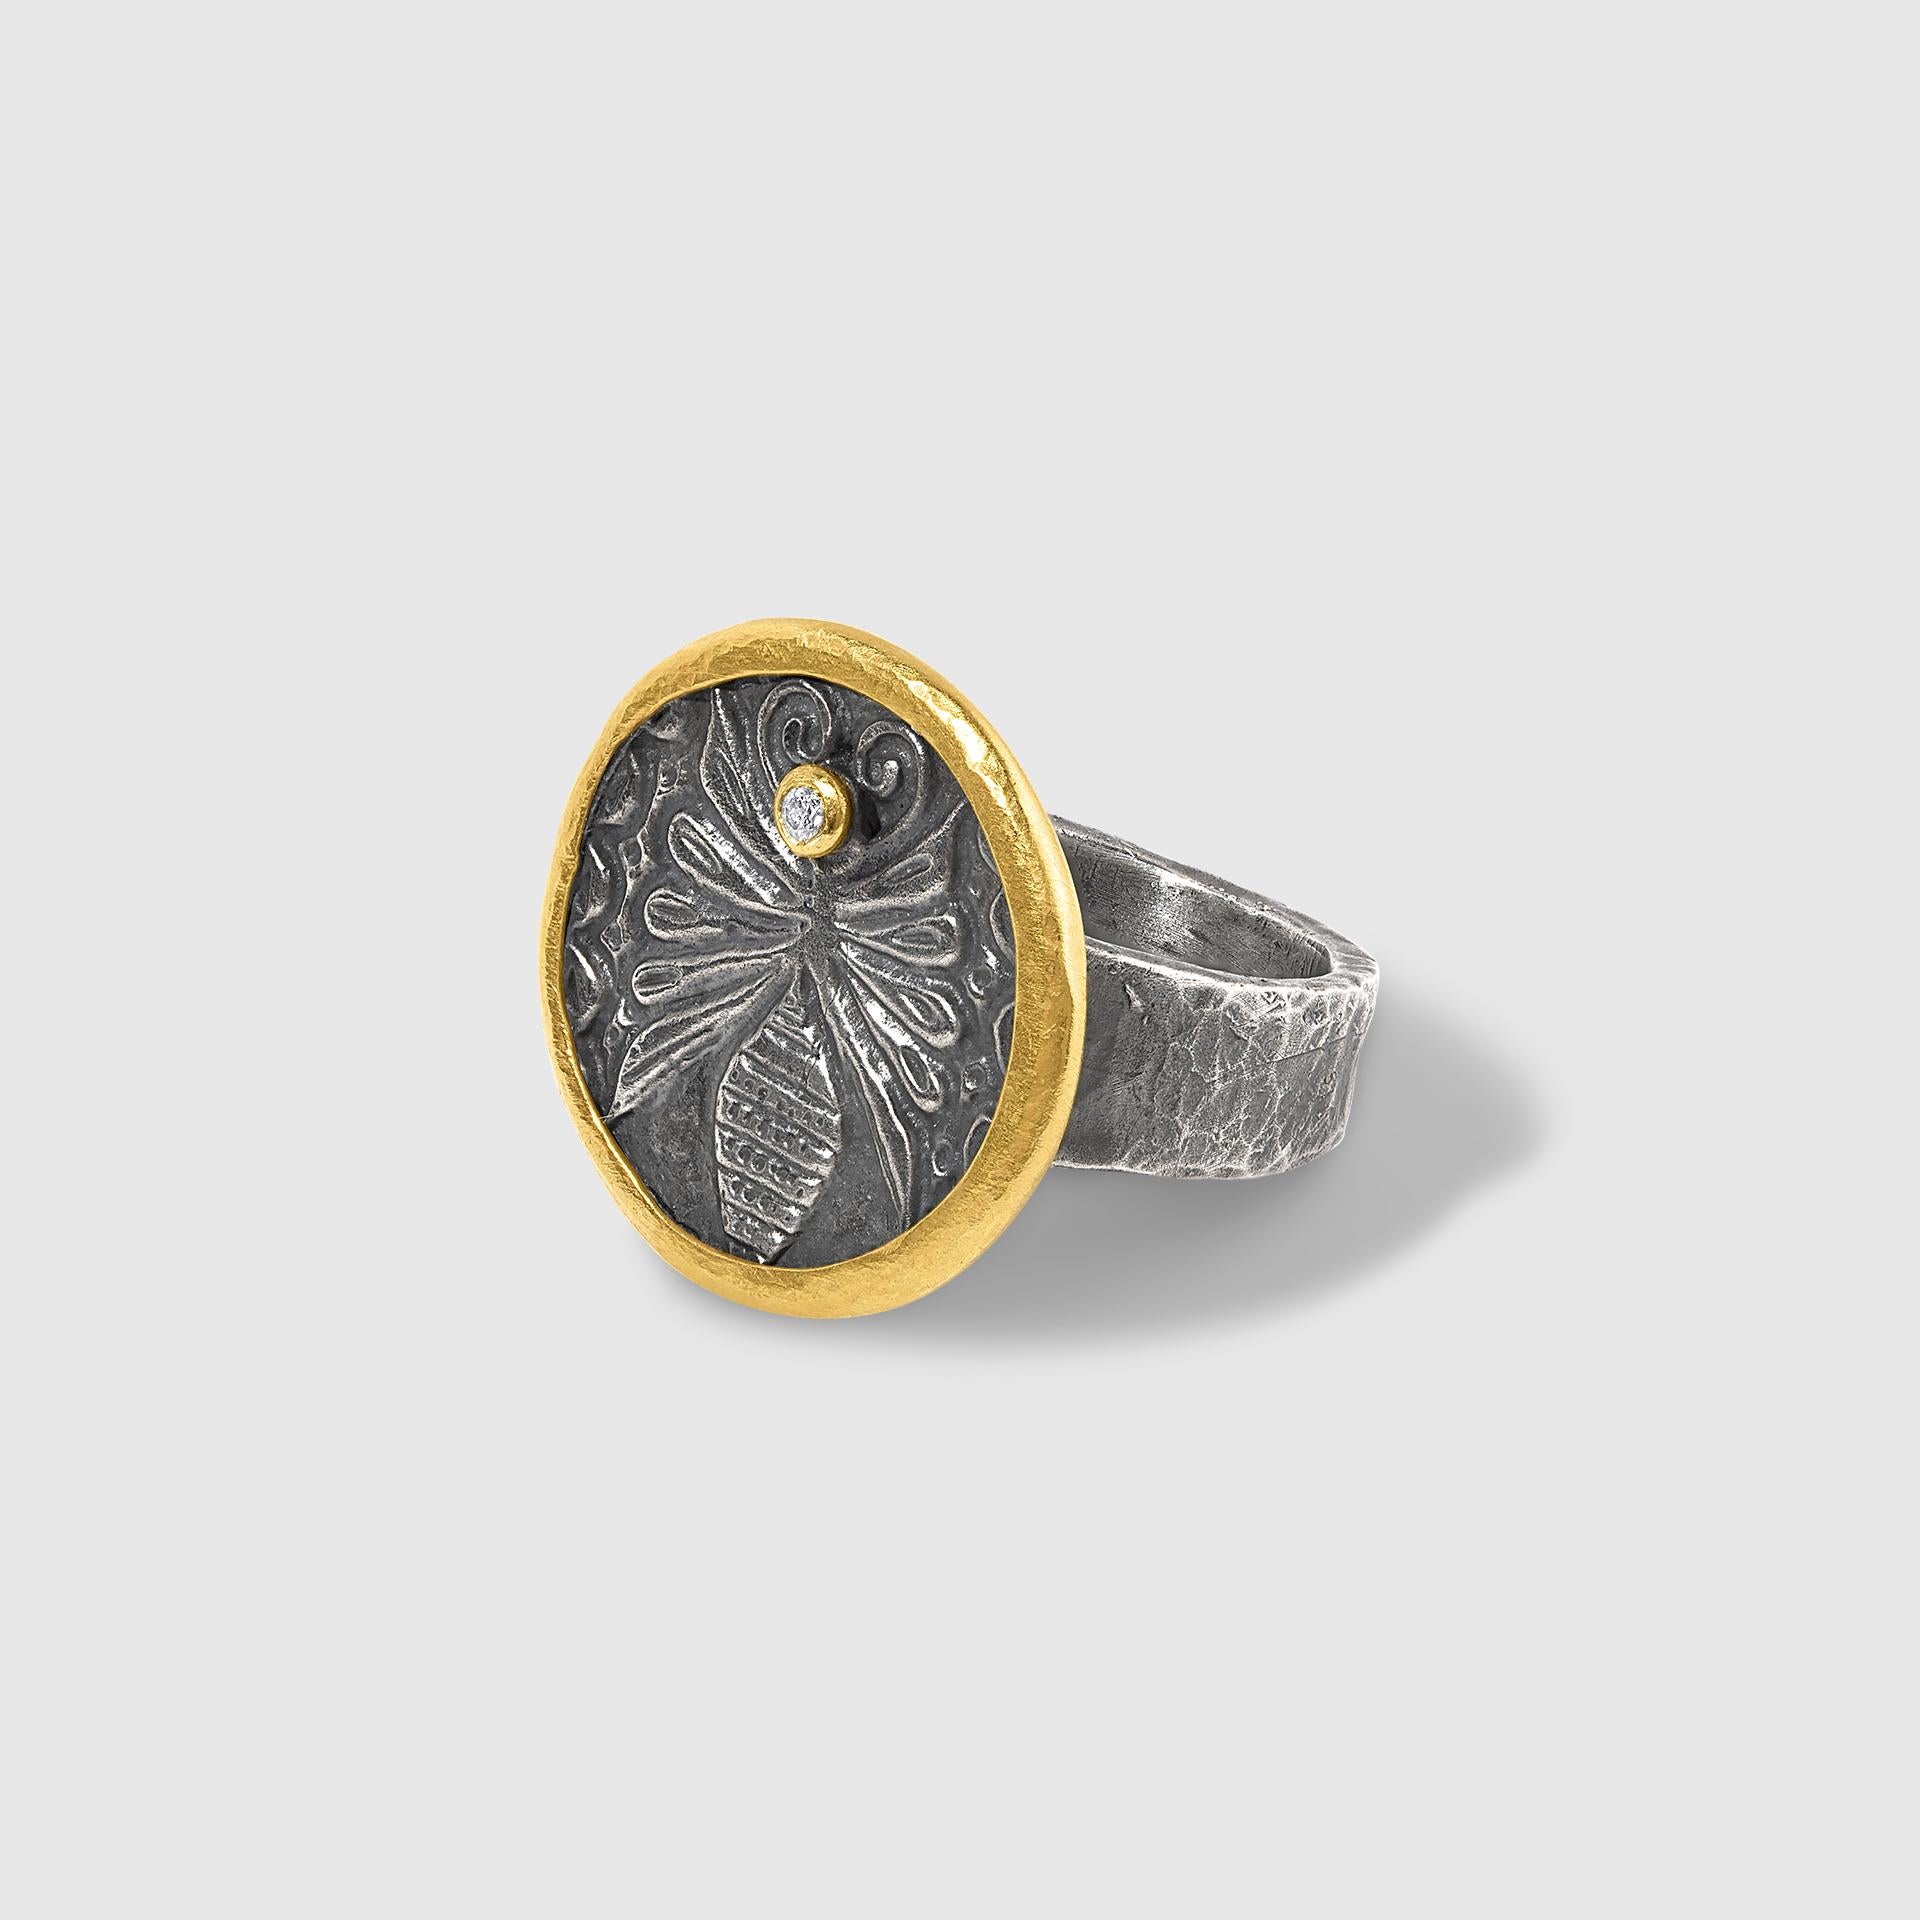 Ancient Roman Bee Coin Ring with Diamond, in 24kt Gold and Silver by Prehistoric Works of Istanbul, Turkey. Diamonds - 0.02cts, Size 6 1/2 US

The wearing of a bee emblem can symbolize a strong network of unconditional love and support. It is also